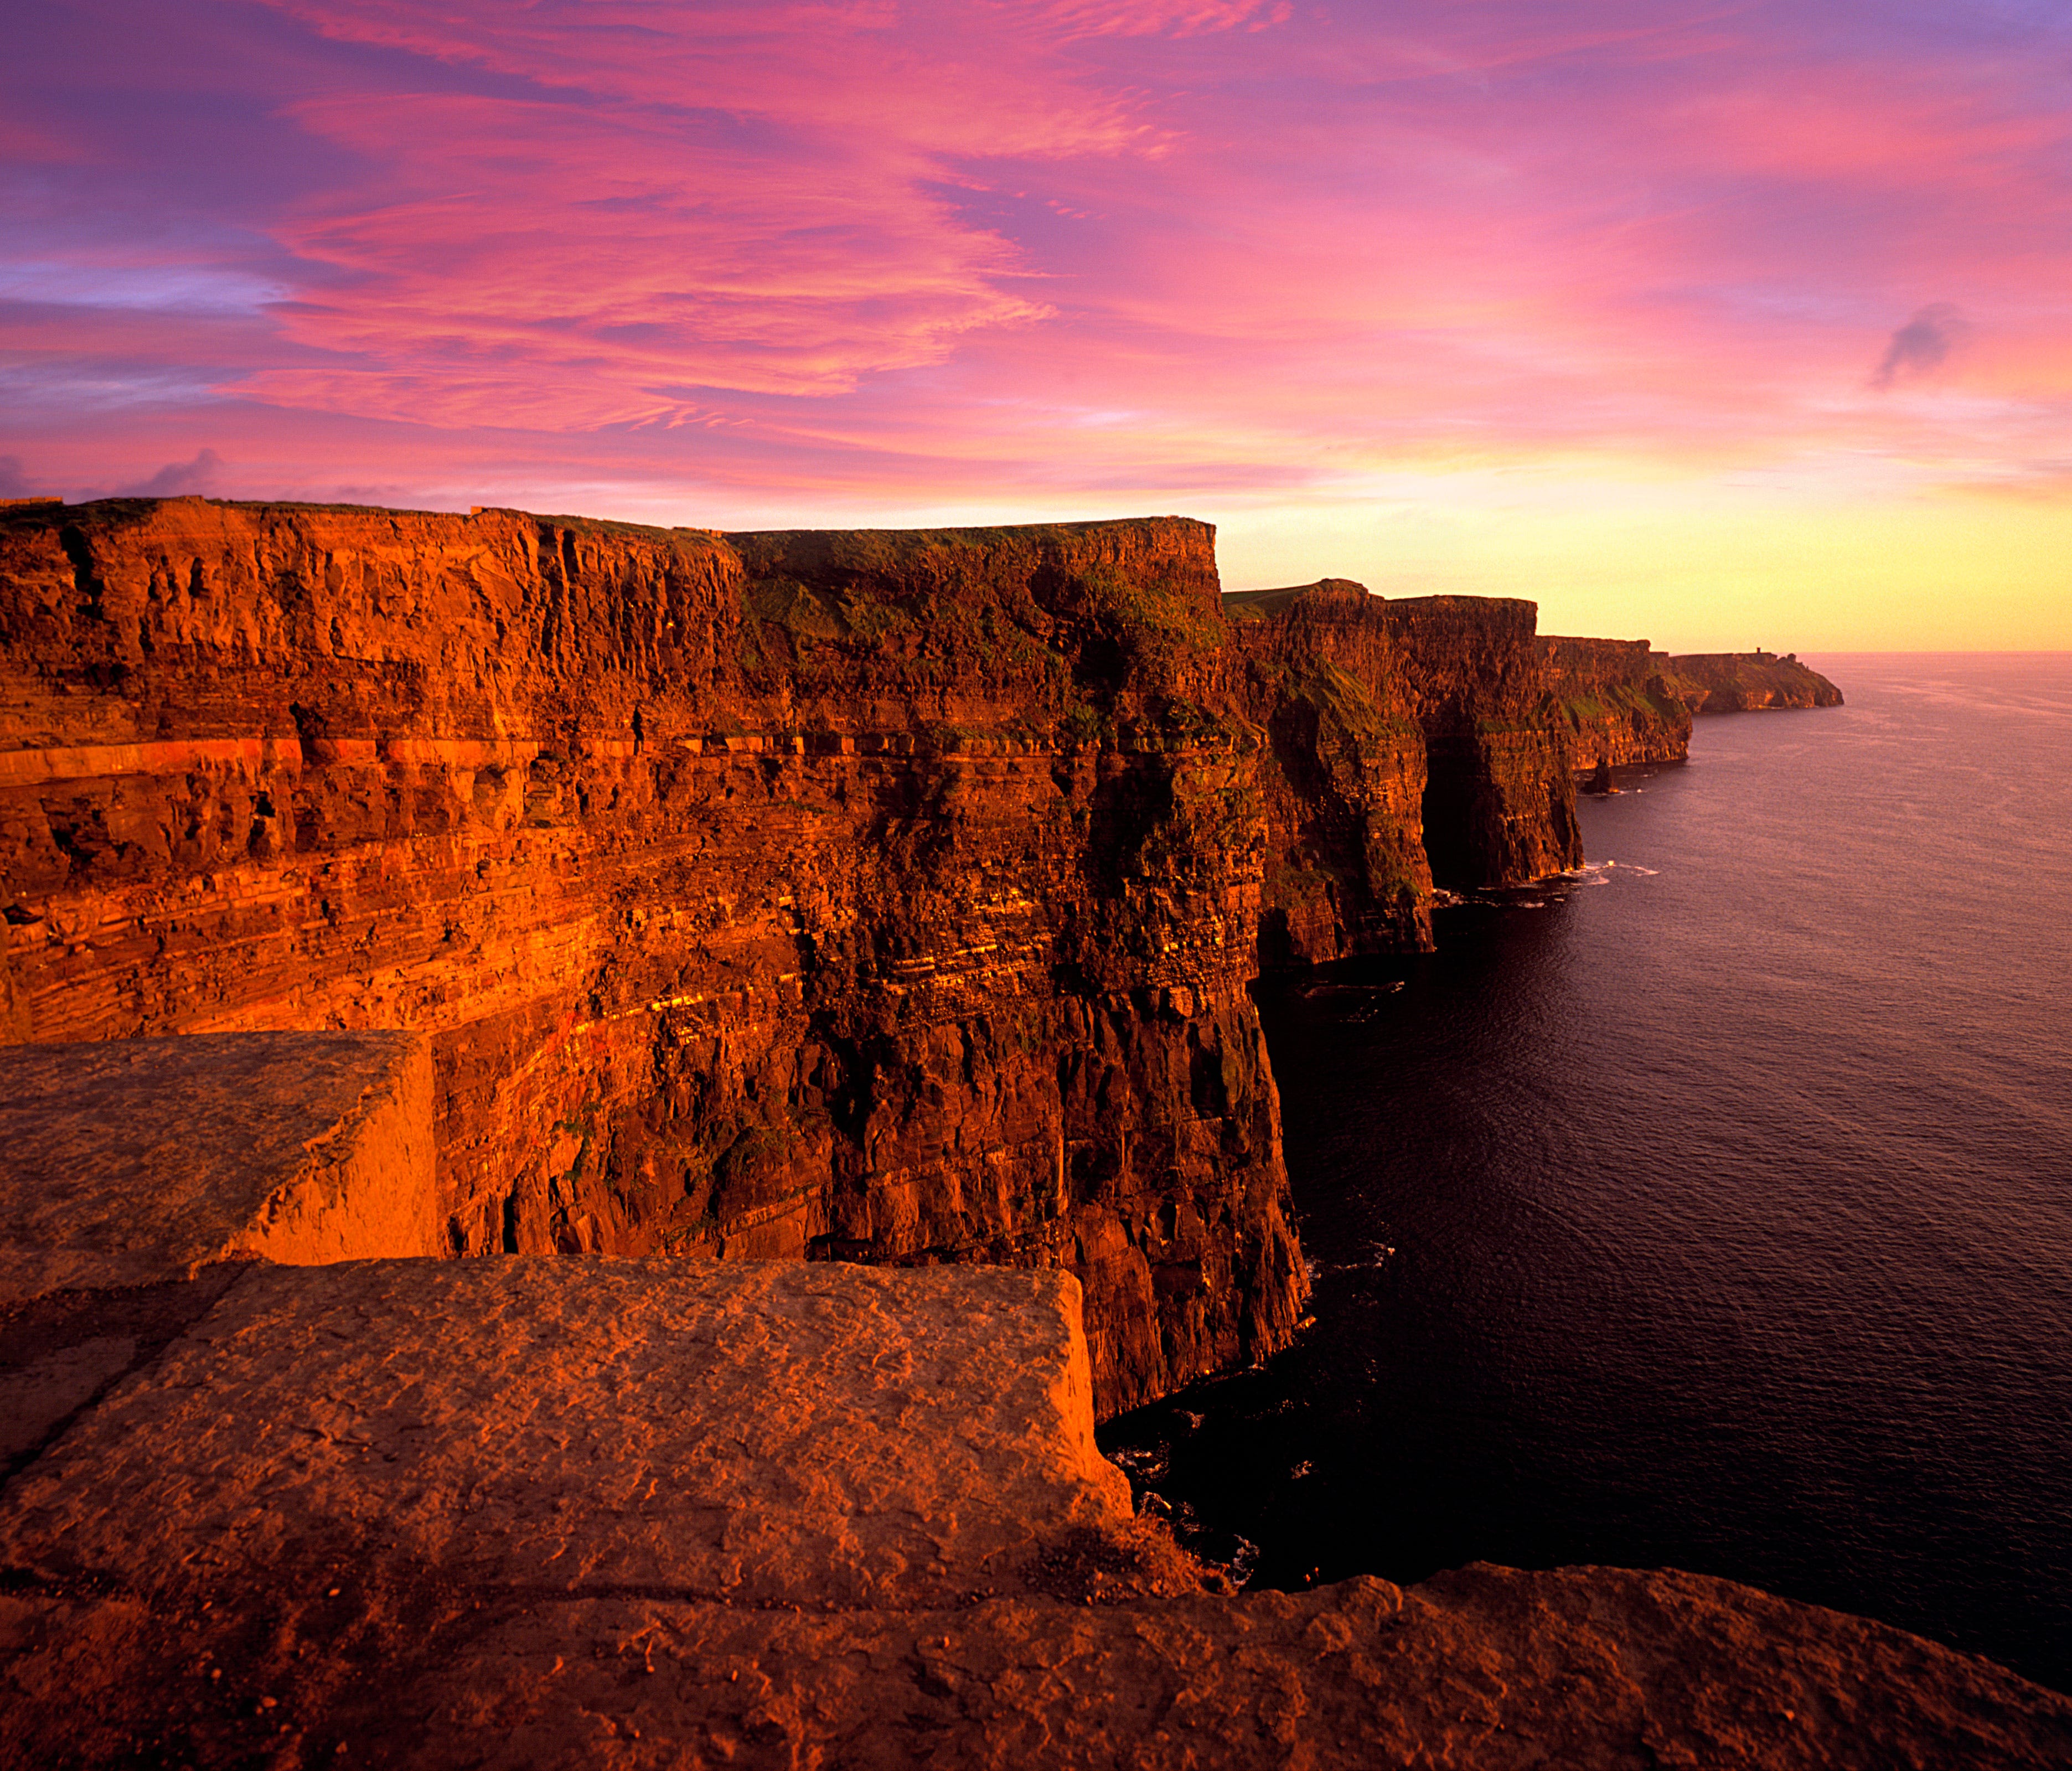 The Cliffs of Moher in County Clare, Ireland, near Limerick is one of the most popular spots on the island.